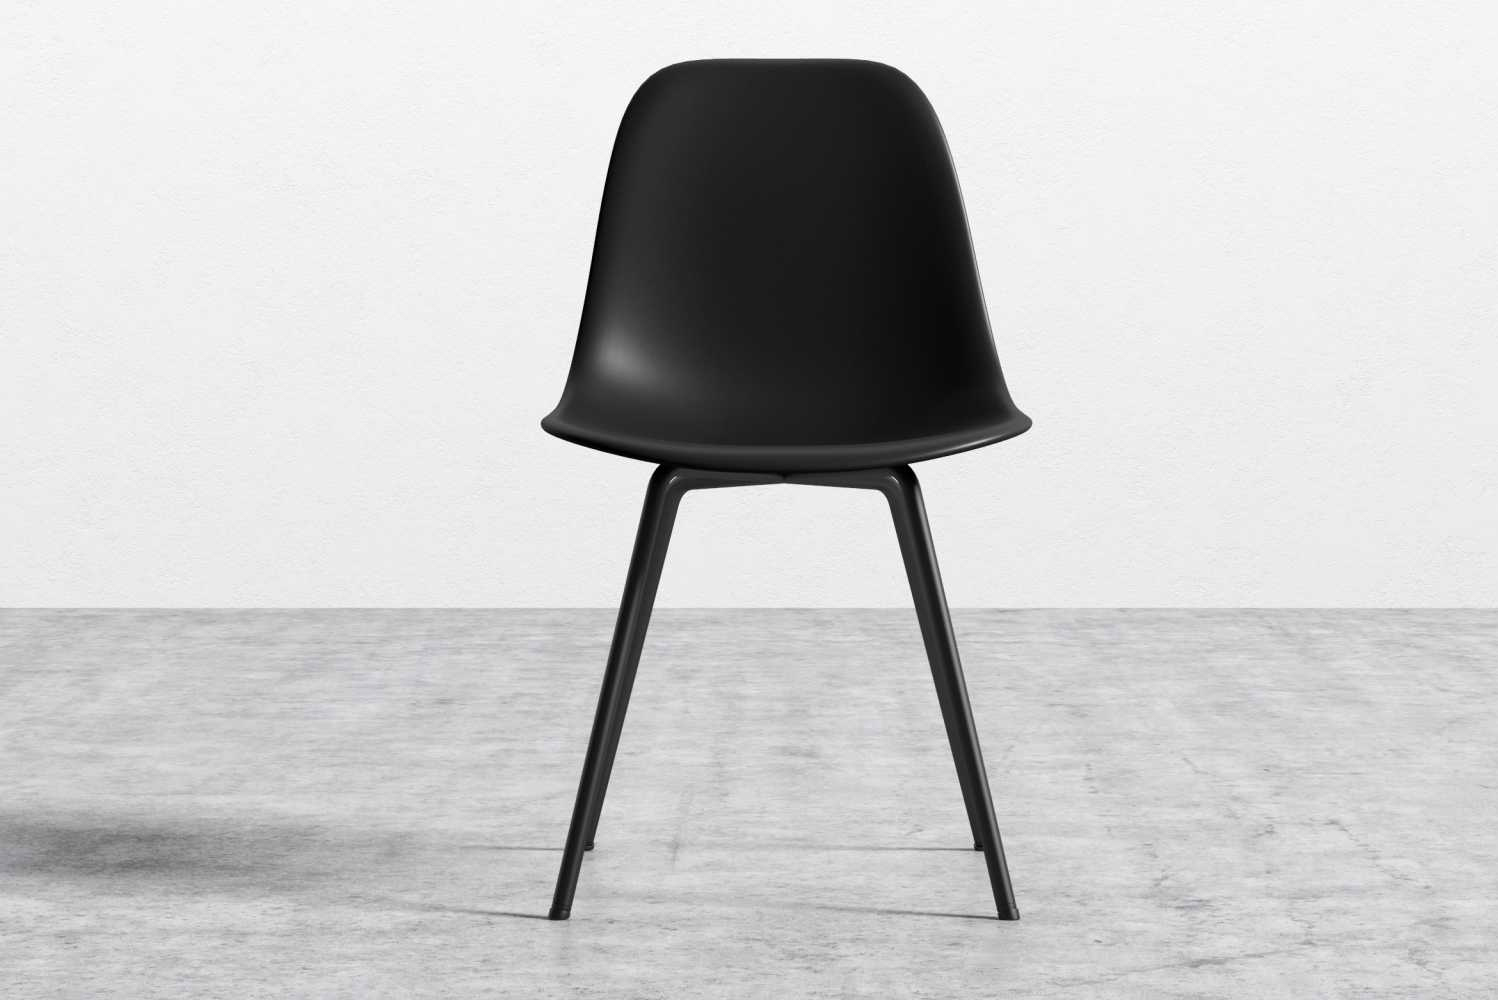 Introducing the Emilia chair from Rove Concepts the sleek luxurious version of the molded plastic DSR chair 